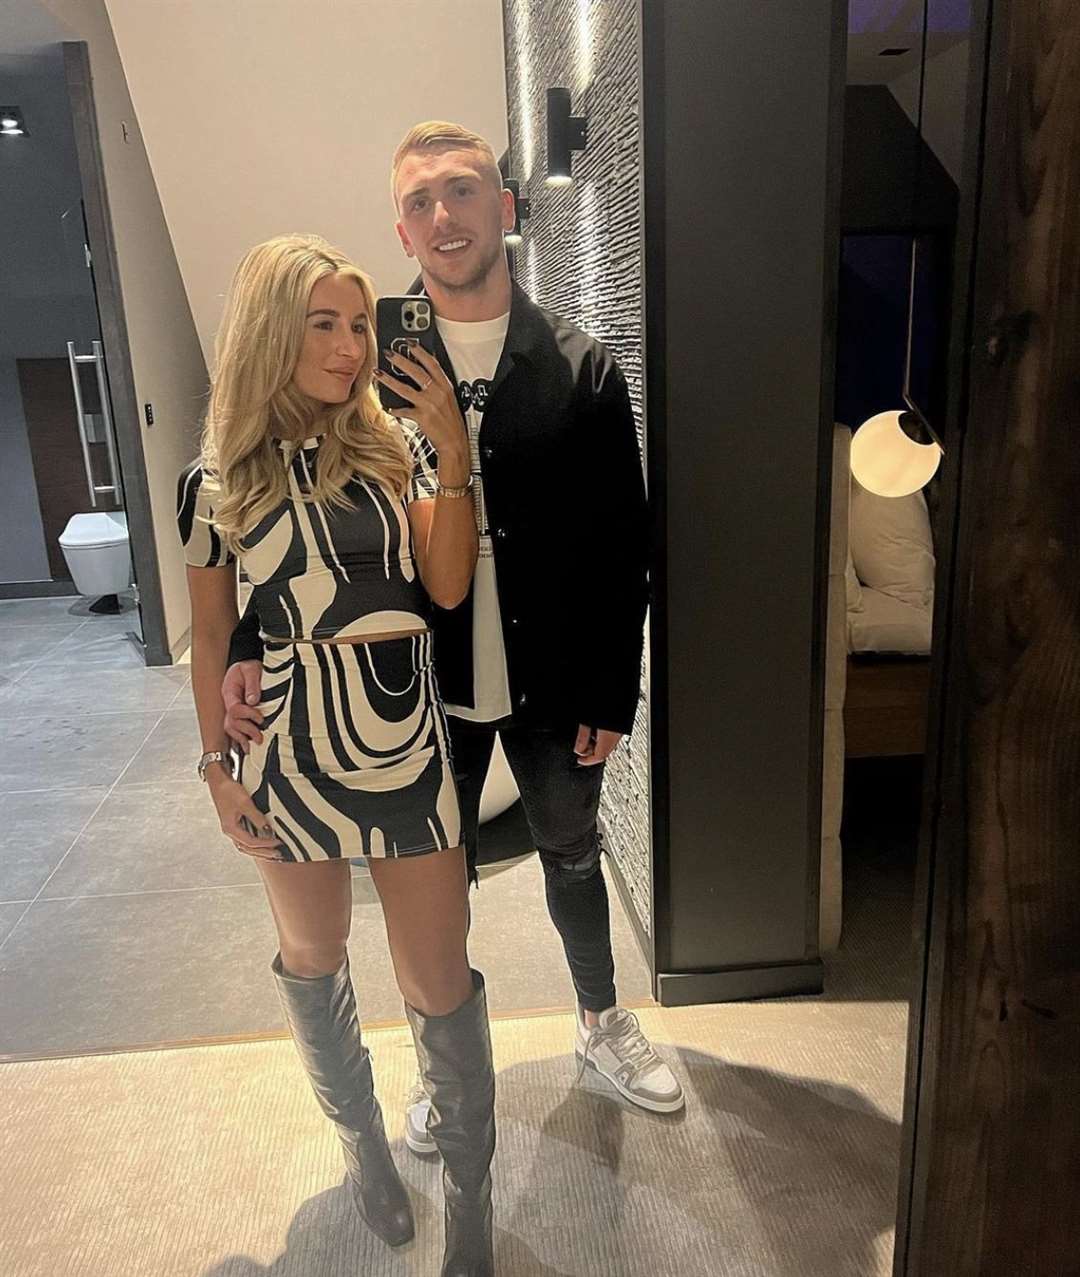 The couple looked to have enjoyed their anniversary. Picture: Dani Dyer/Instagram